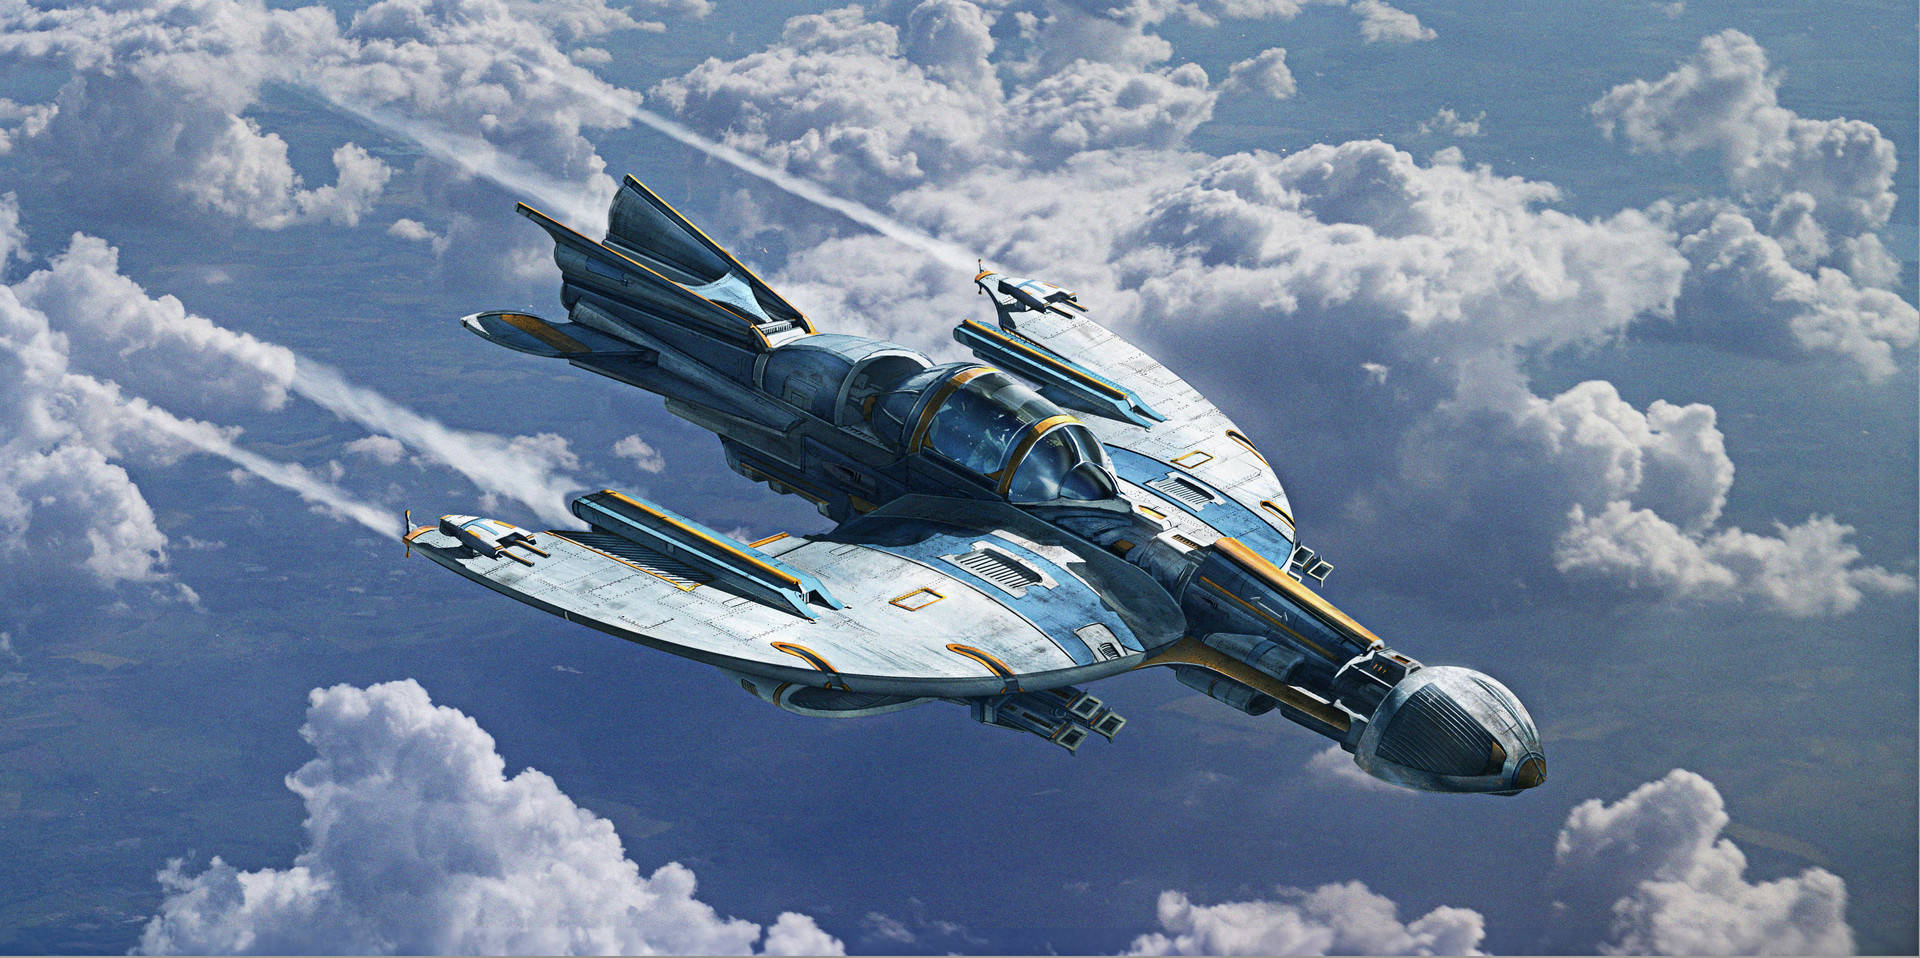 Spaceship In The Sky Wallpaper